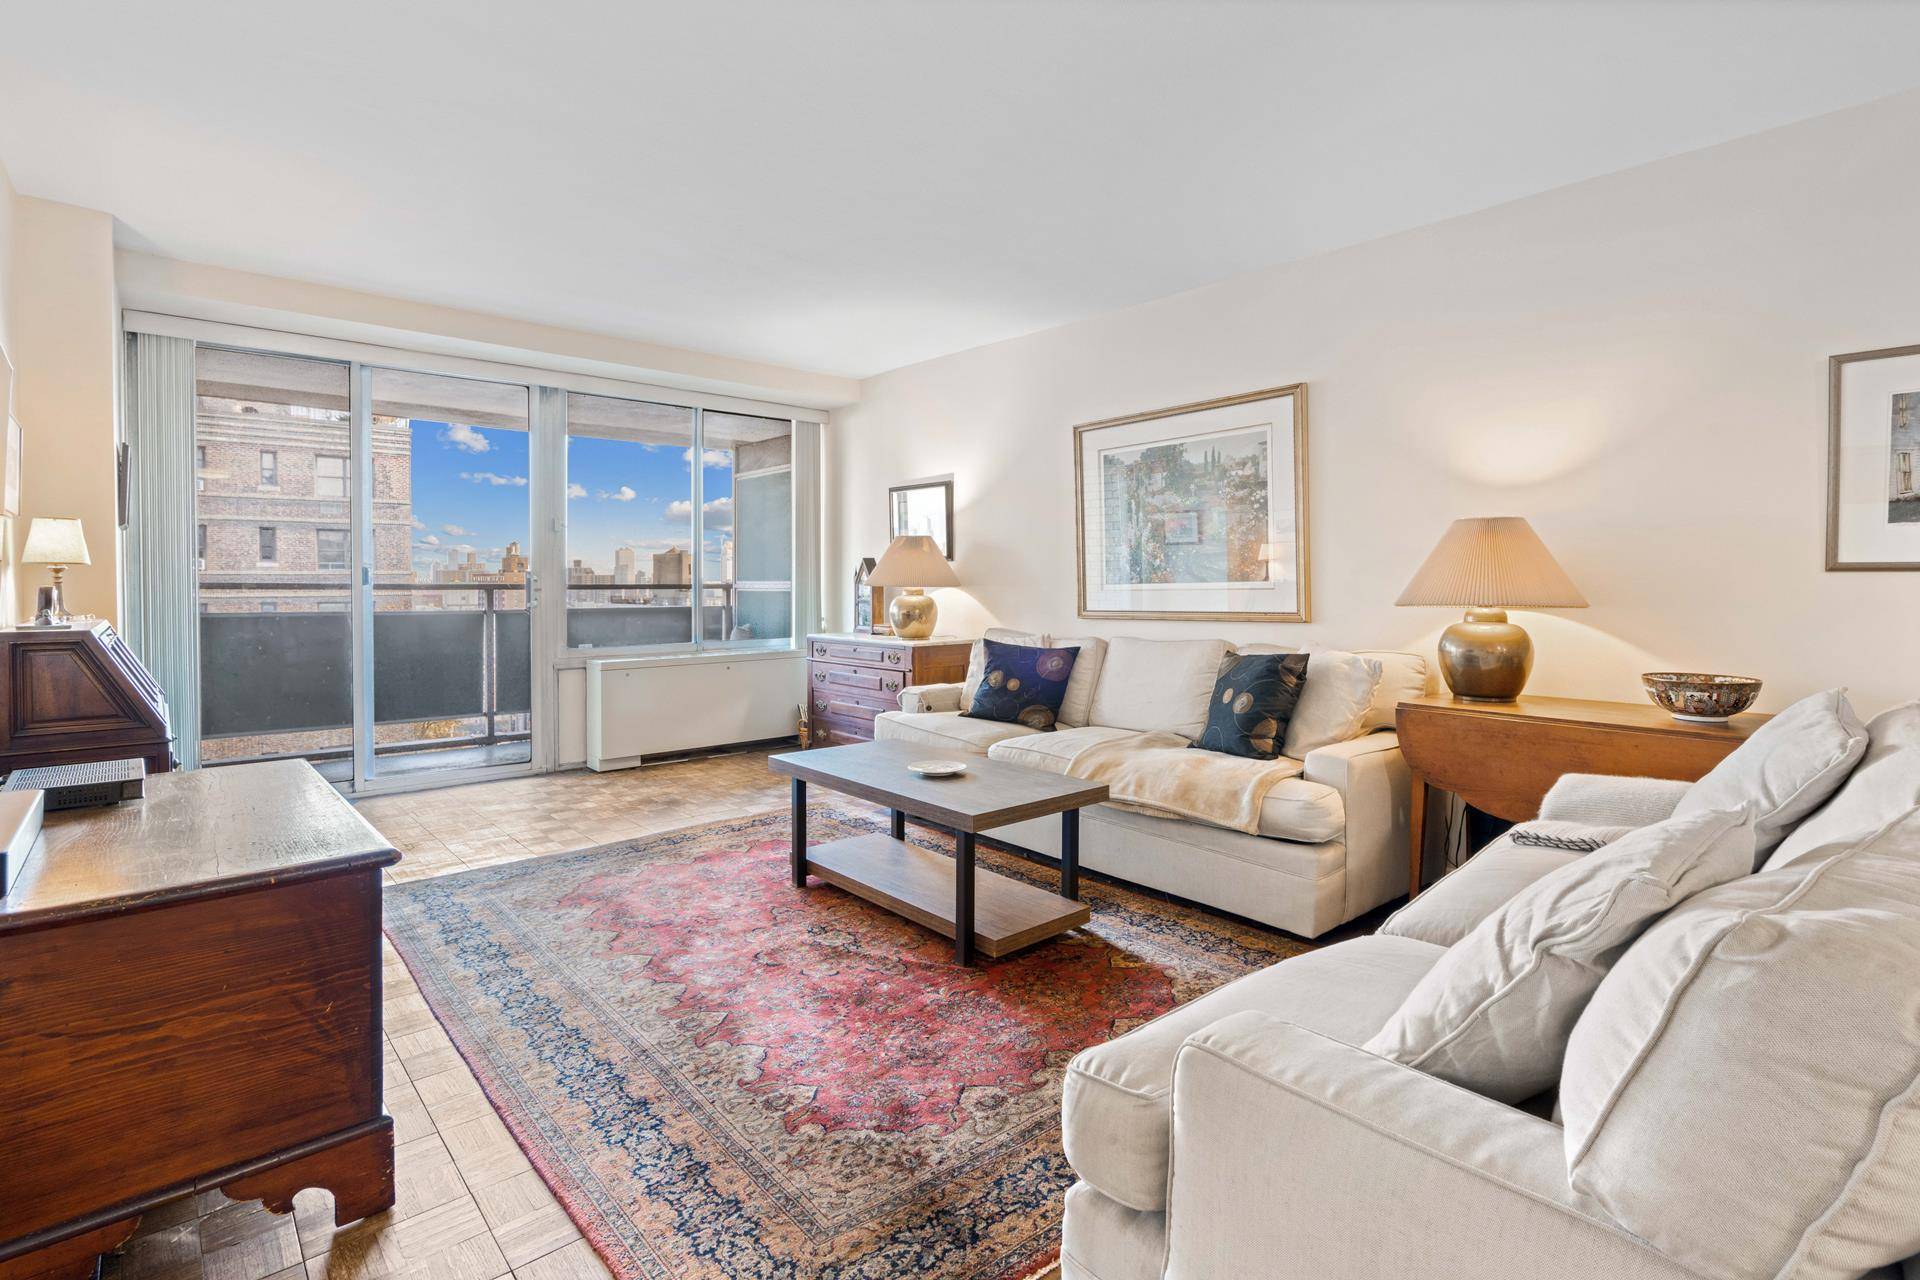 Welcome home to your dream apartment in one of Manhattan's most sought after neighborhoods Gramercy Park.